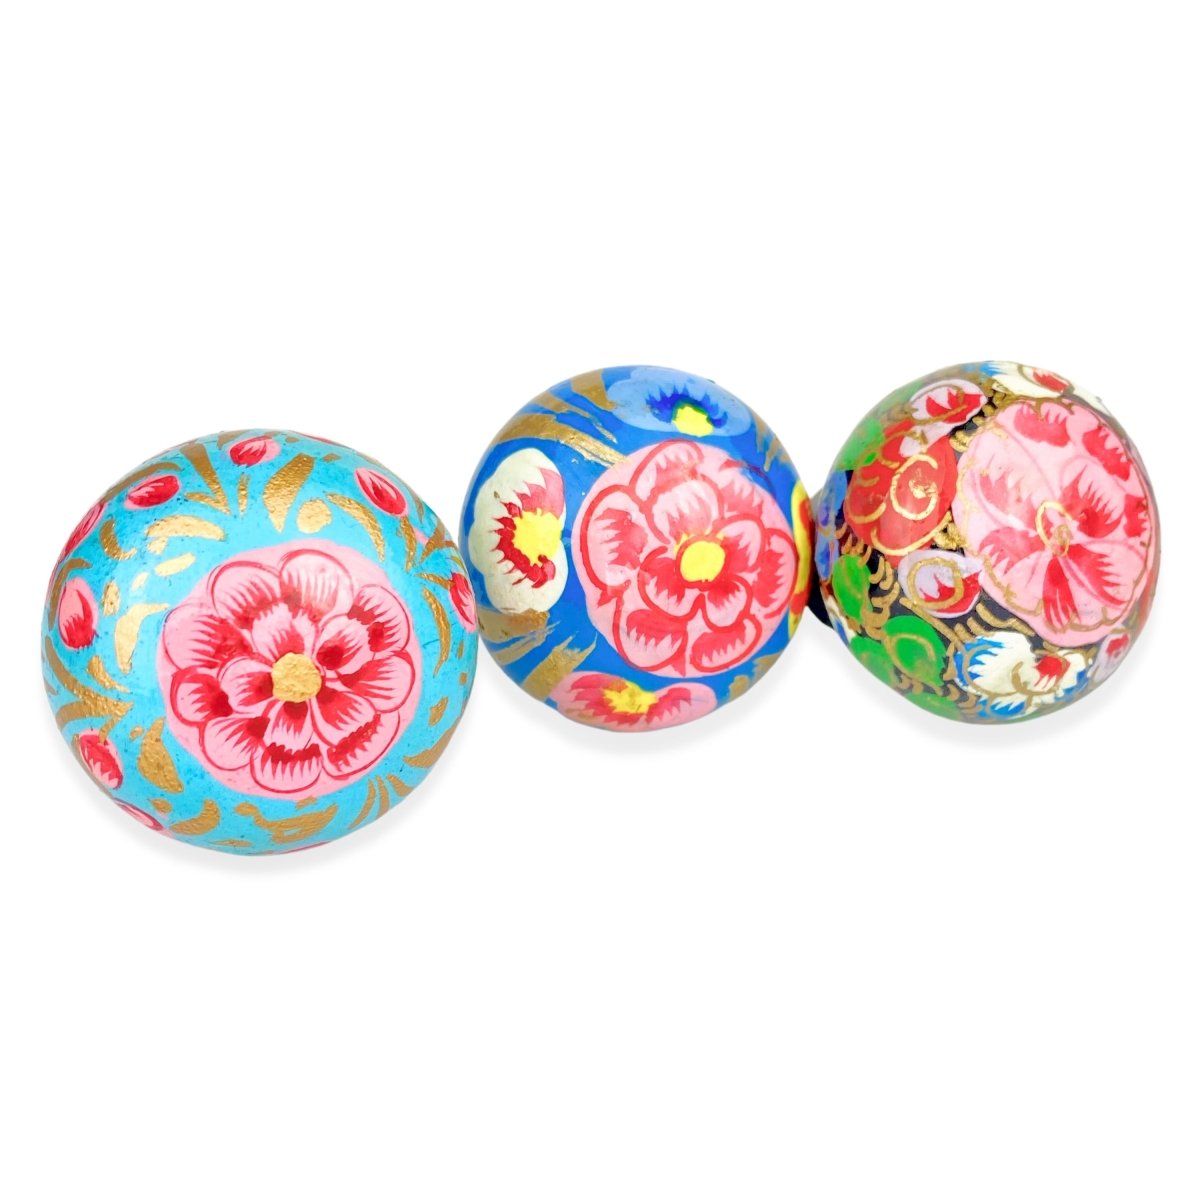 Hand Painted Wooden Flower Knobs - DaRosa Creations